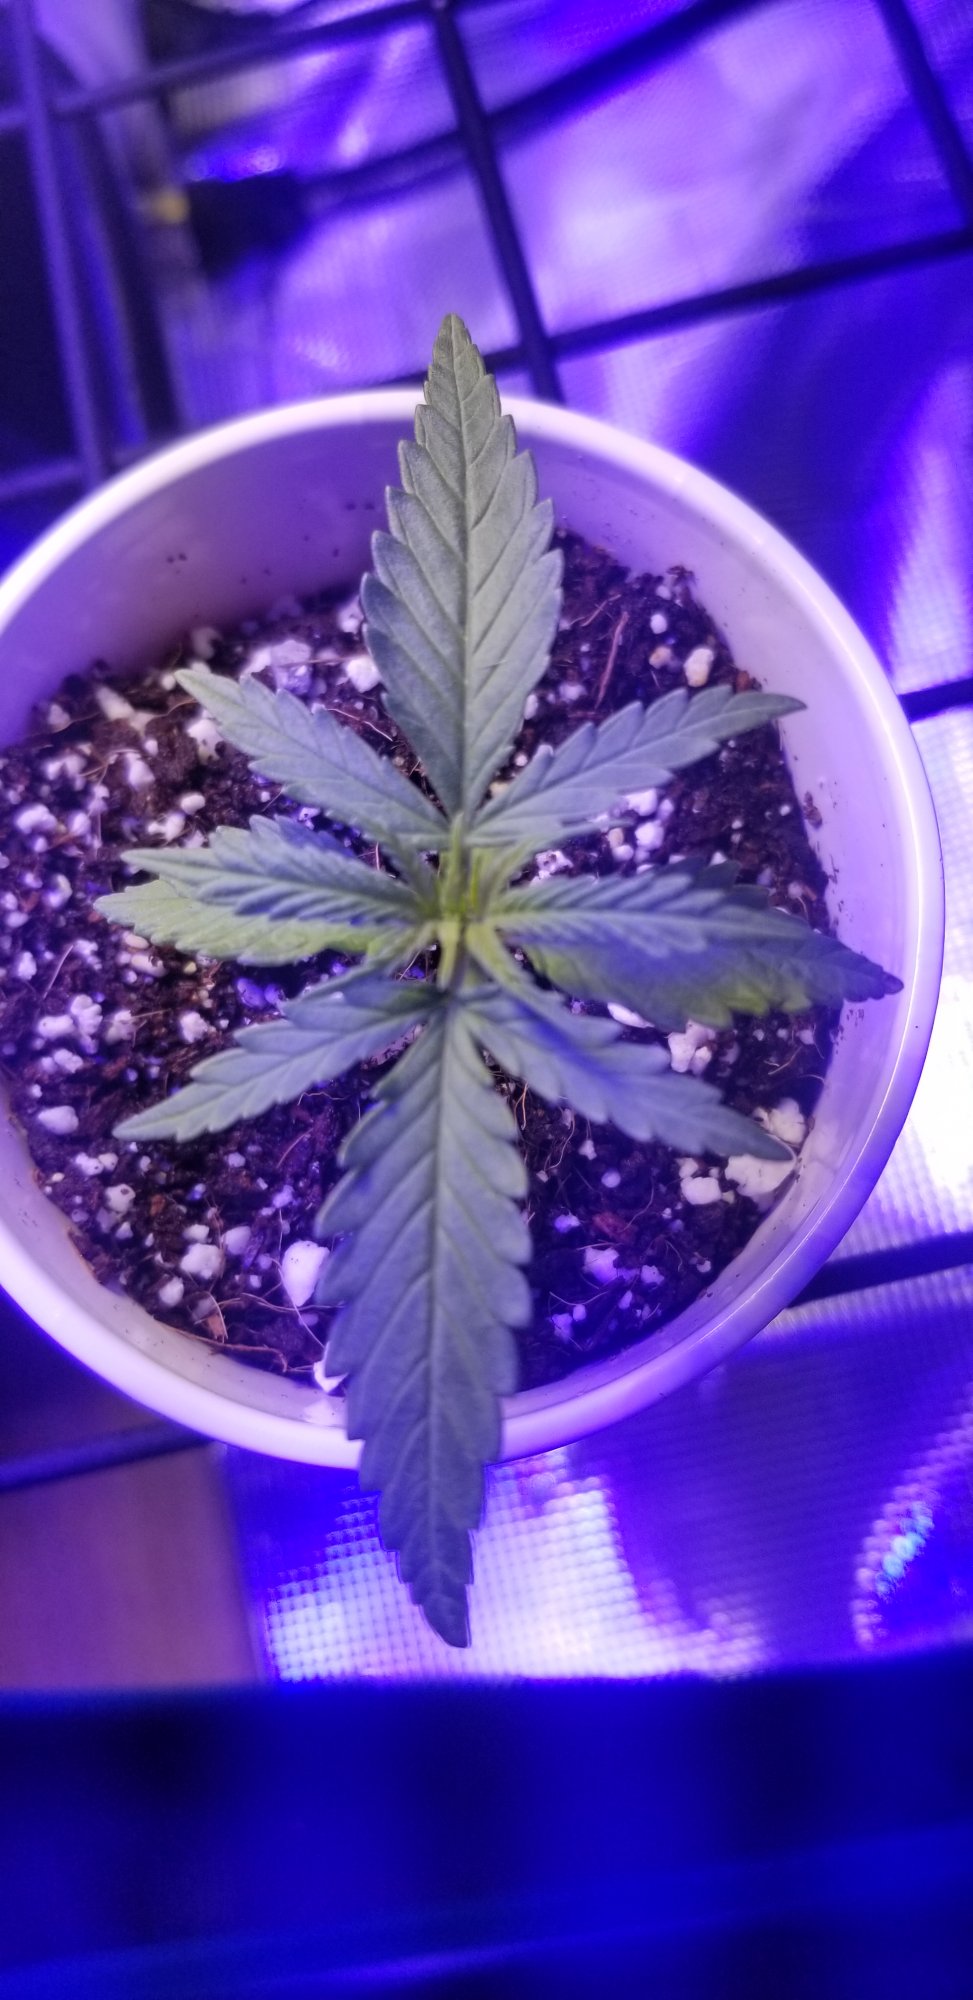 Trial error monitoring adjusting first grow coco coir daily pics and updates 10